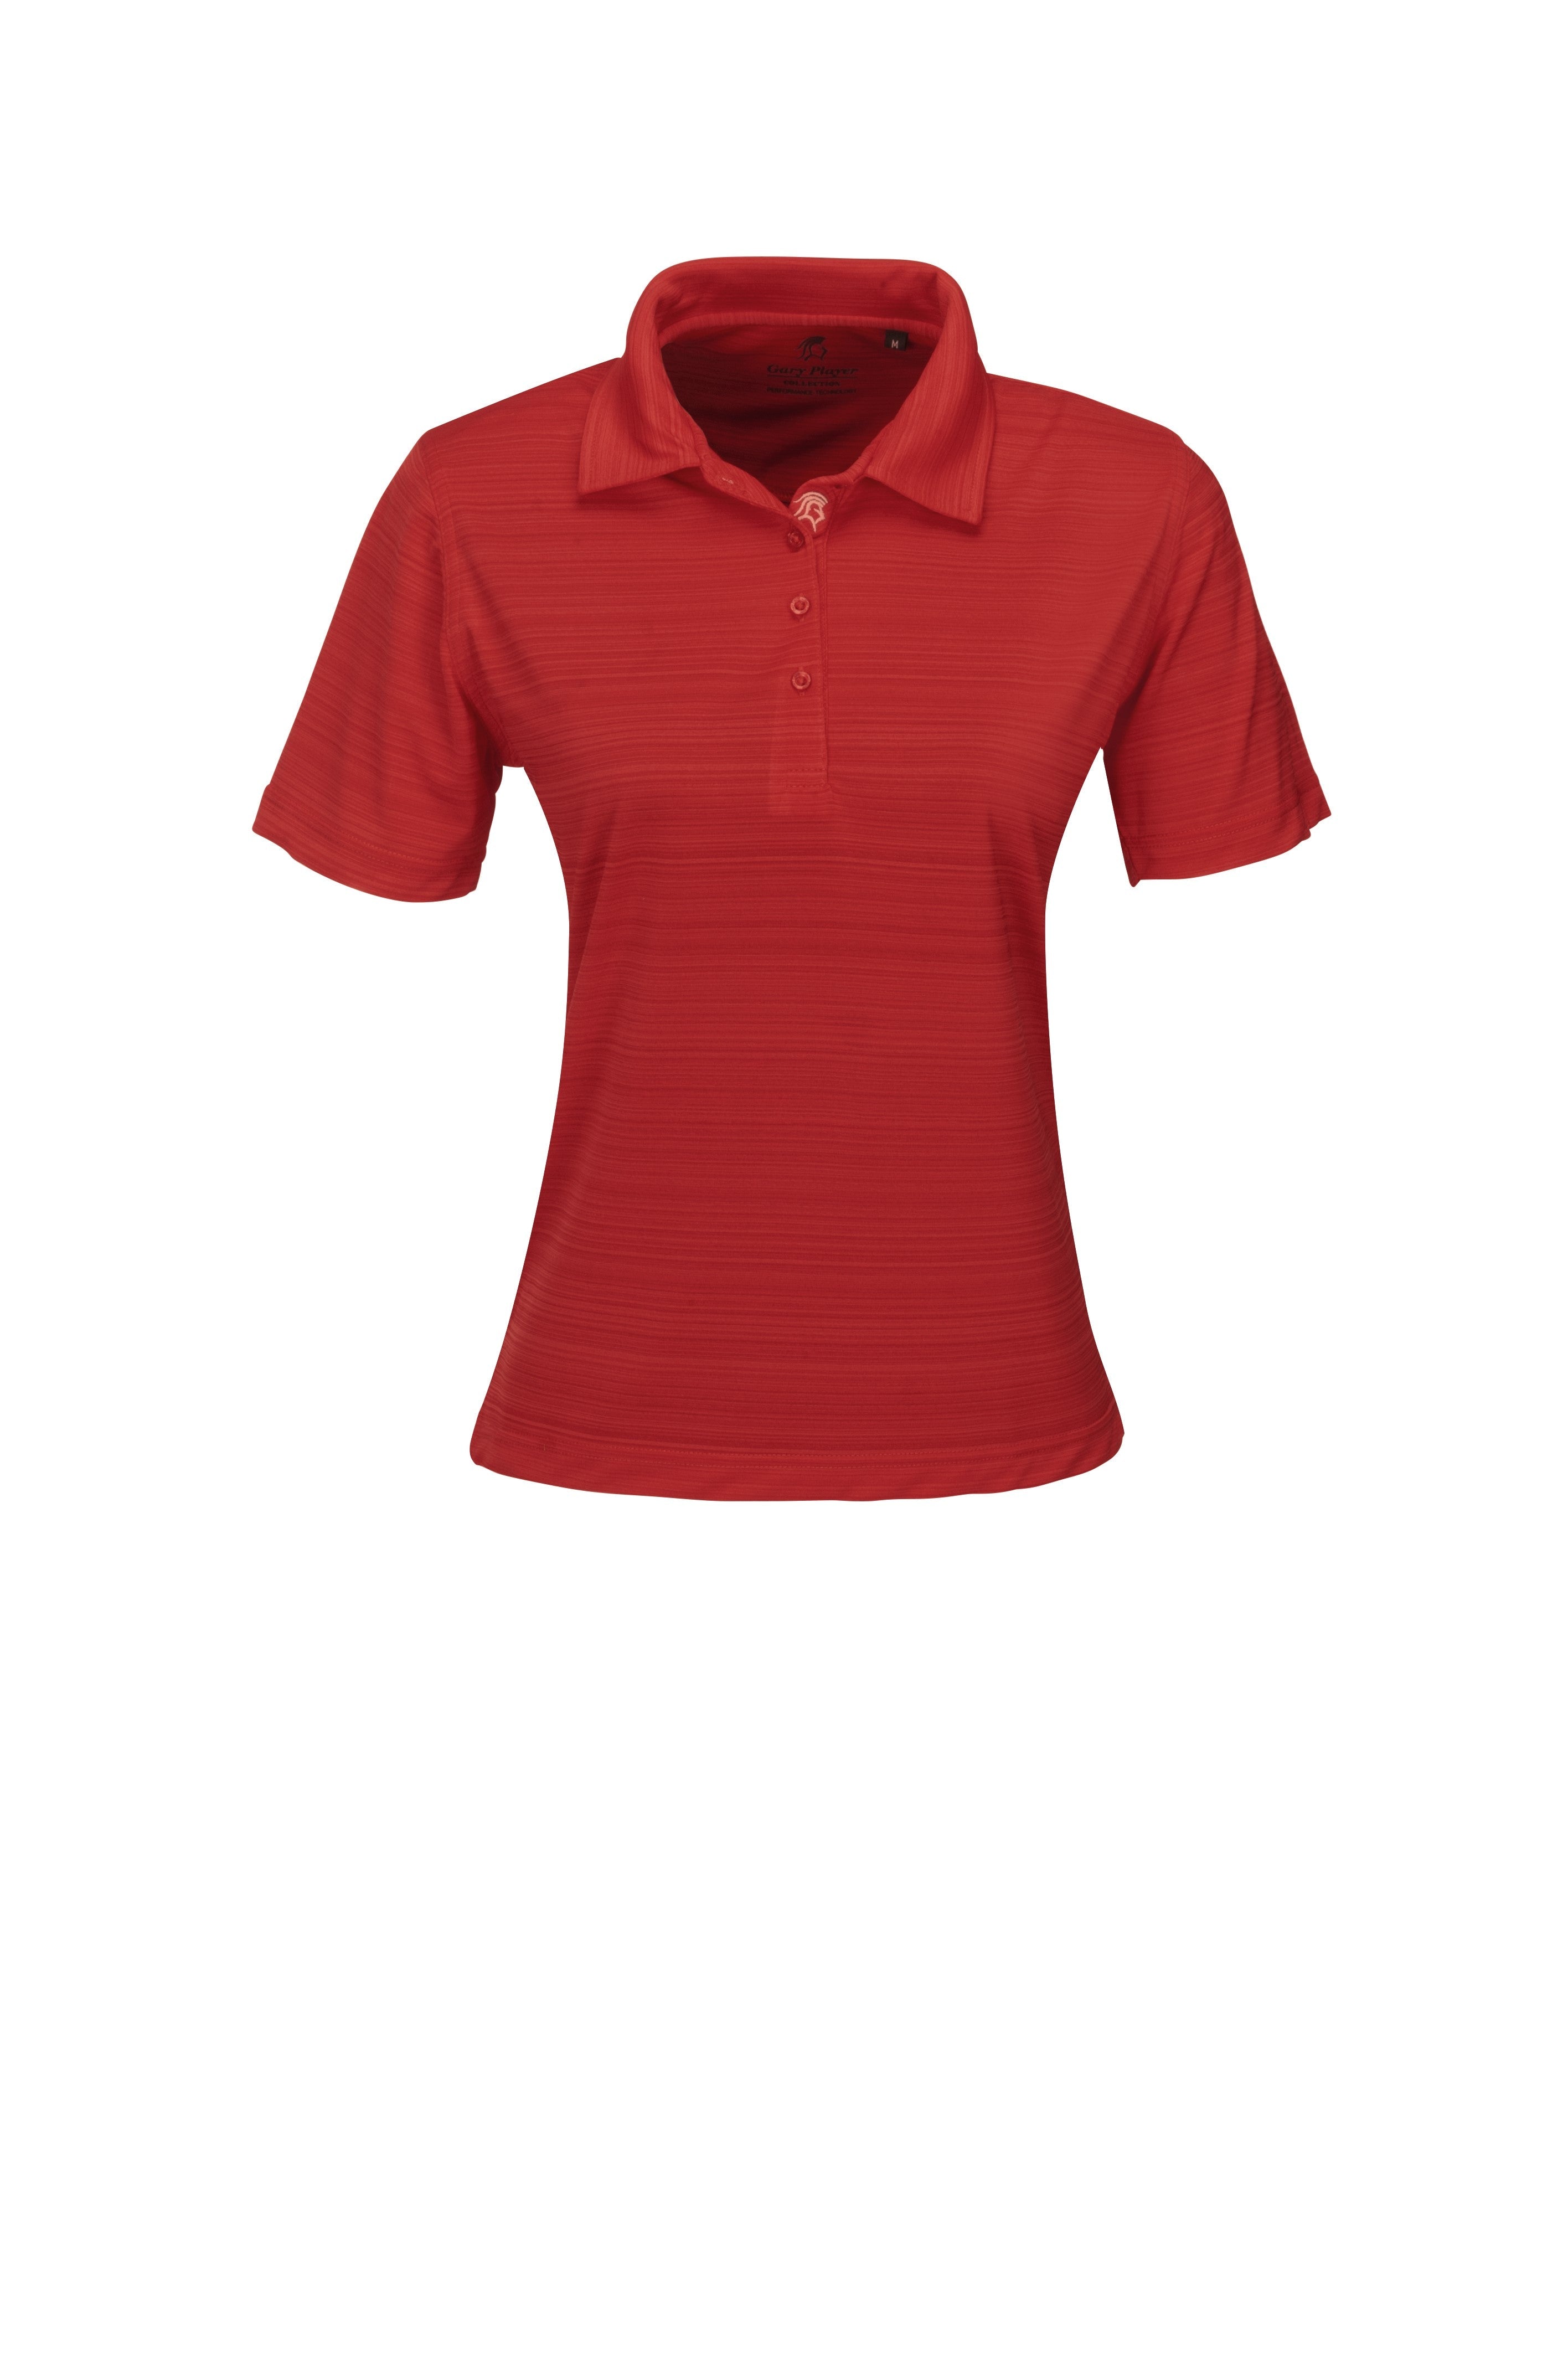 Ladies Astoria Golf Shirt - Lime Only-L-Red-R